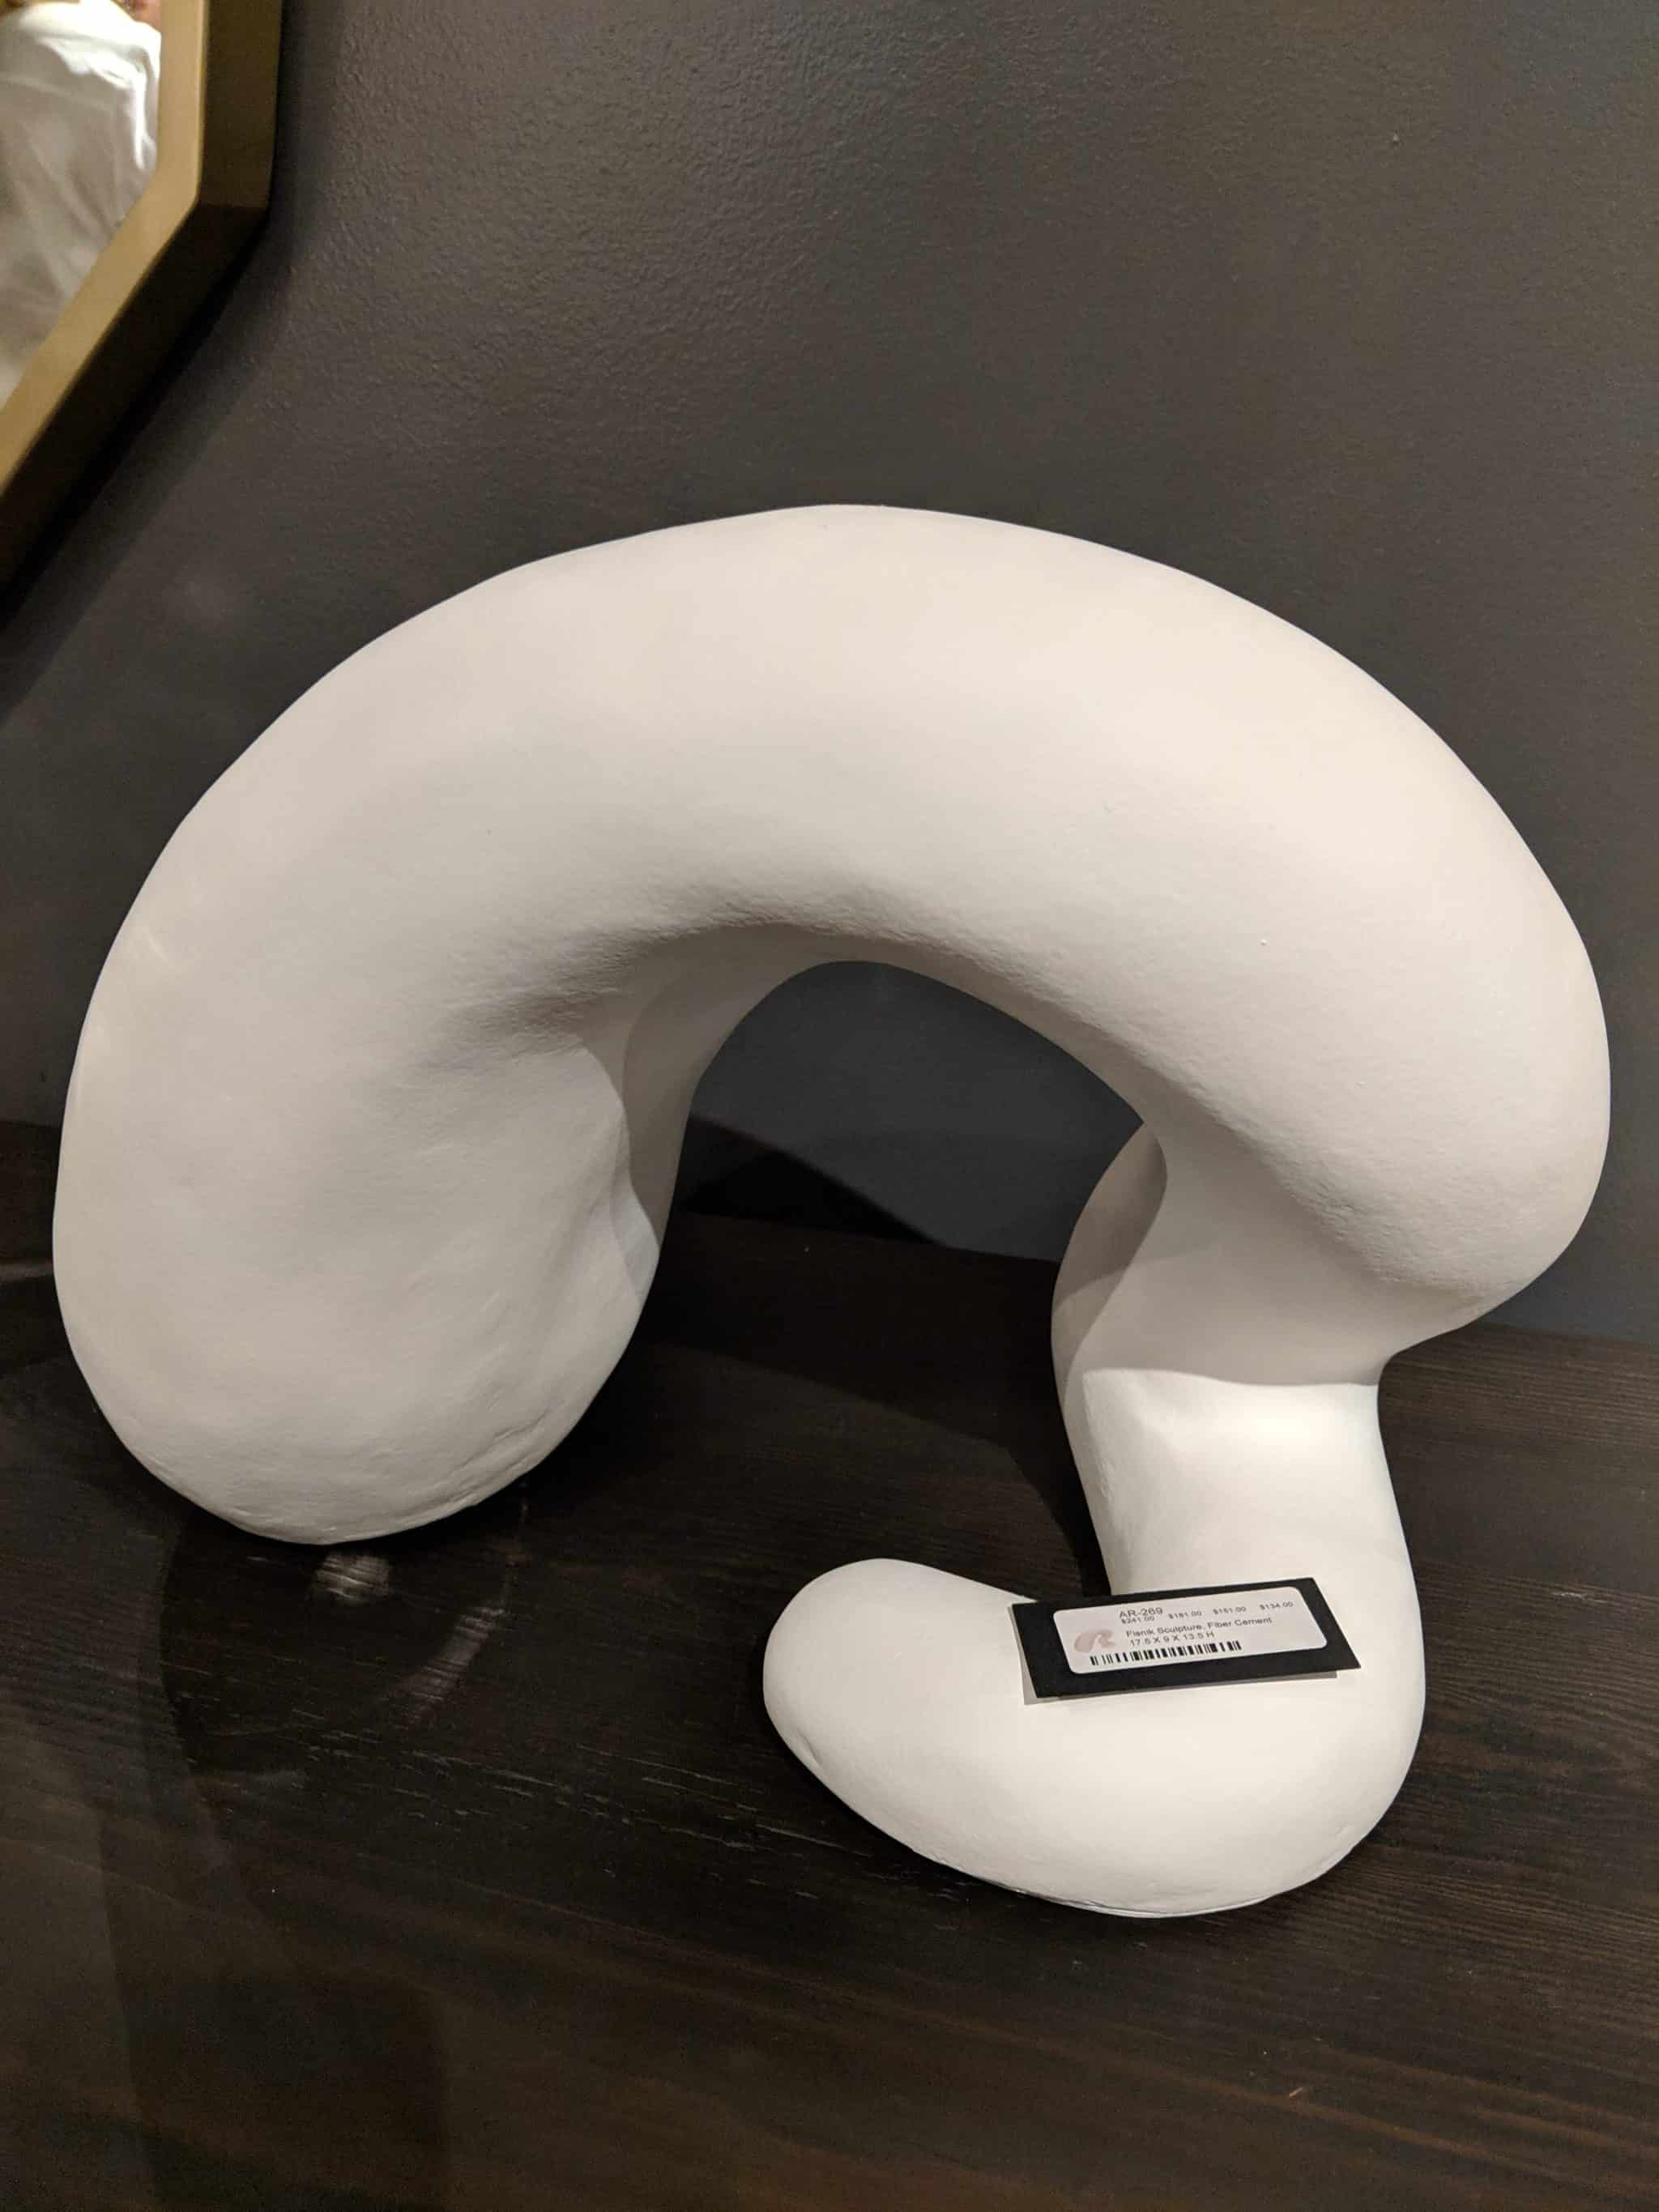 Imperfect, gessoed sculpture at High Point Market 2019